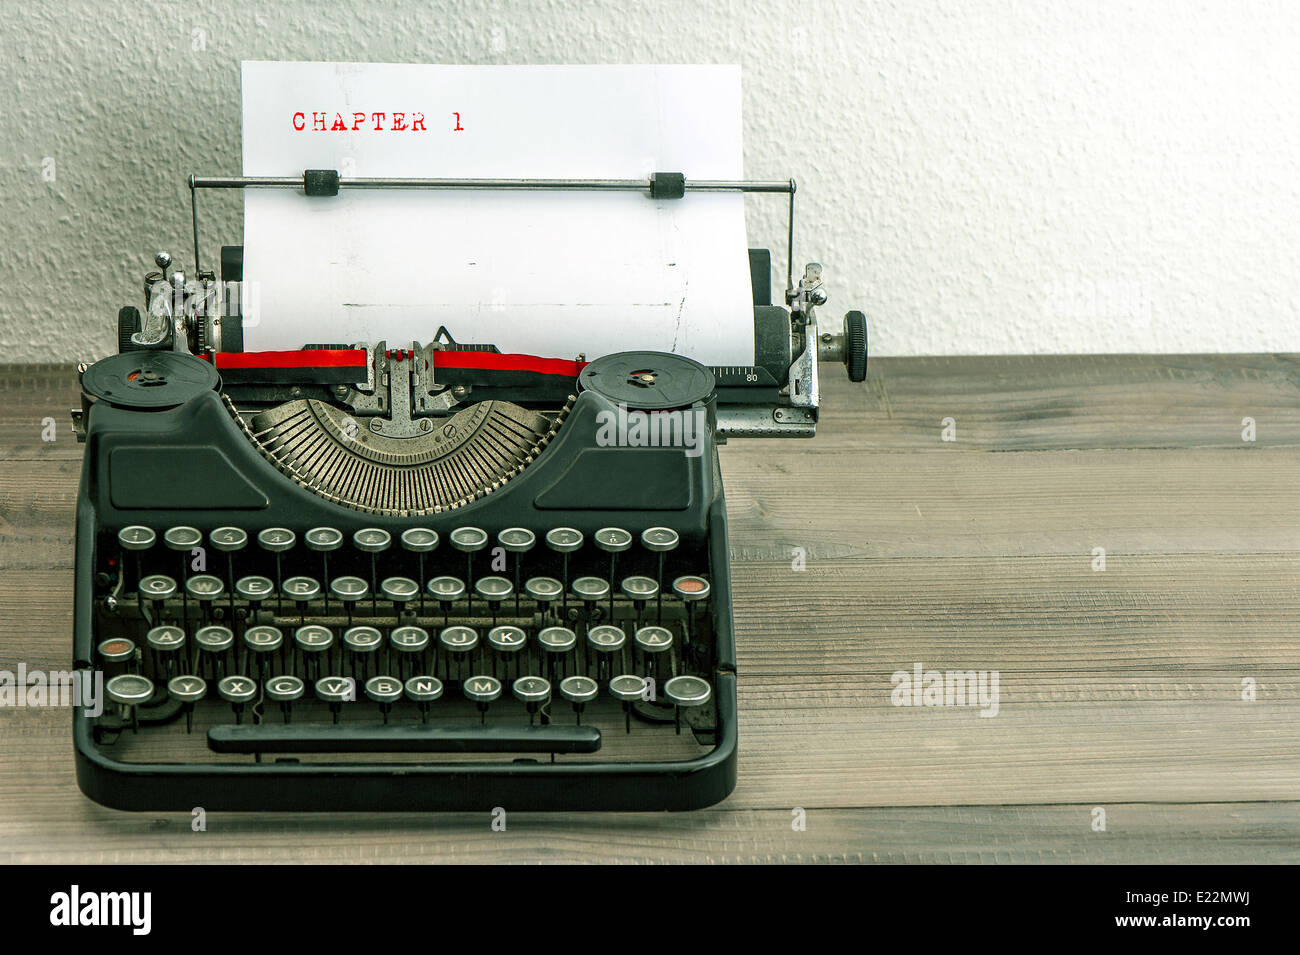 typewriter with white paper page on wooden table. sample text Chapter 1 Stock Photo